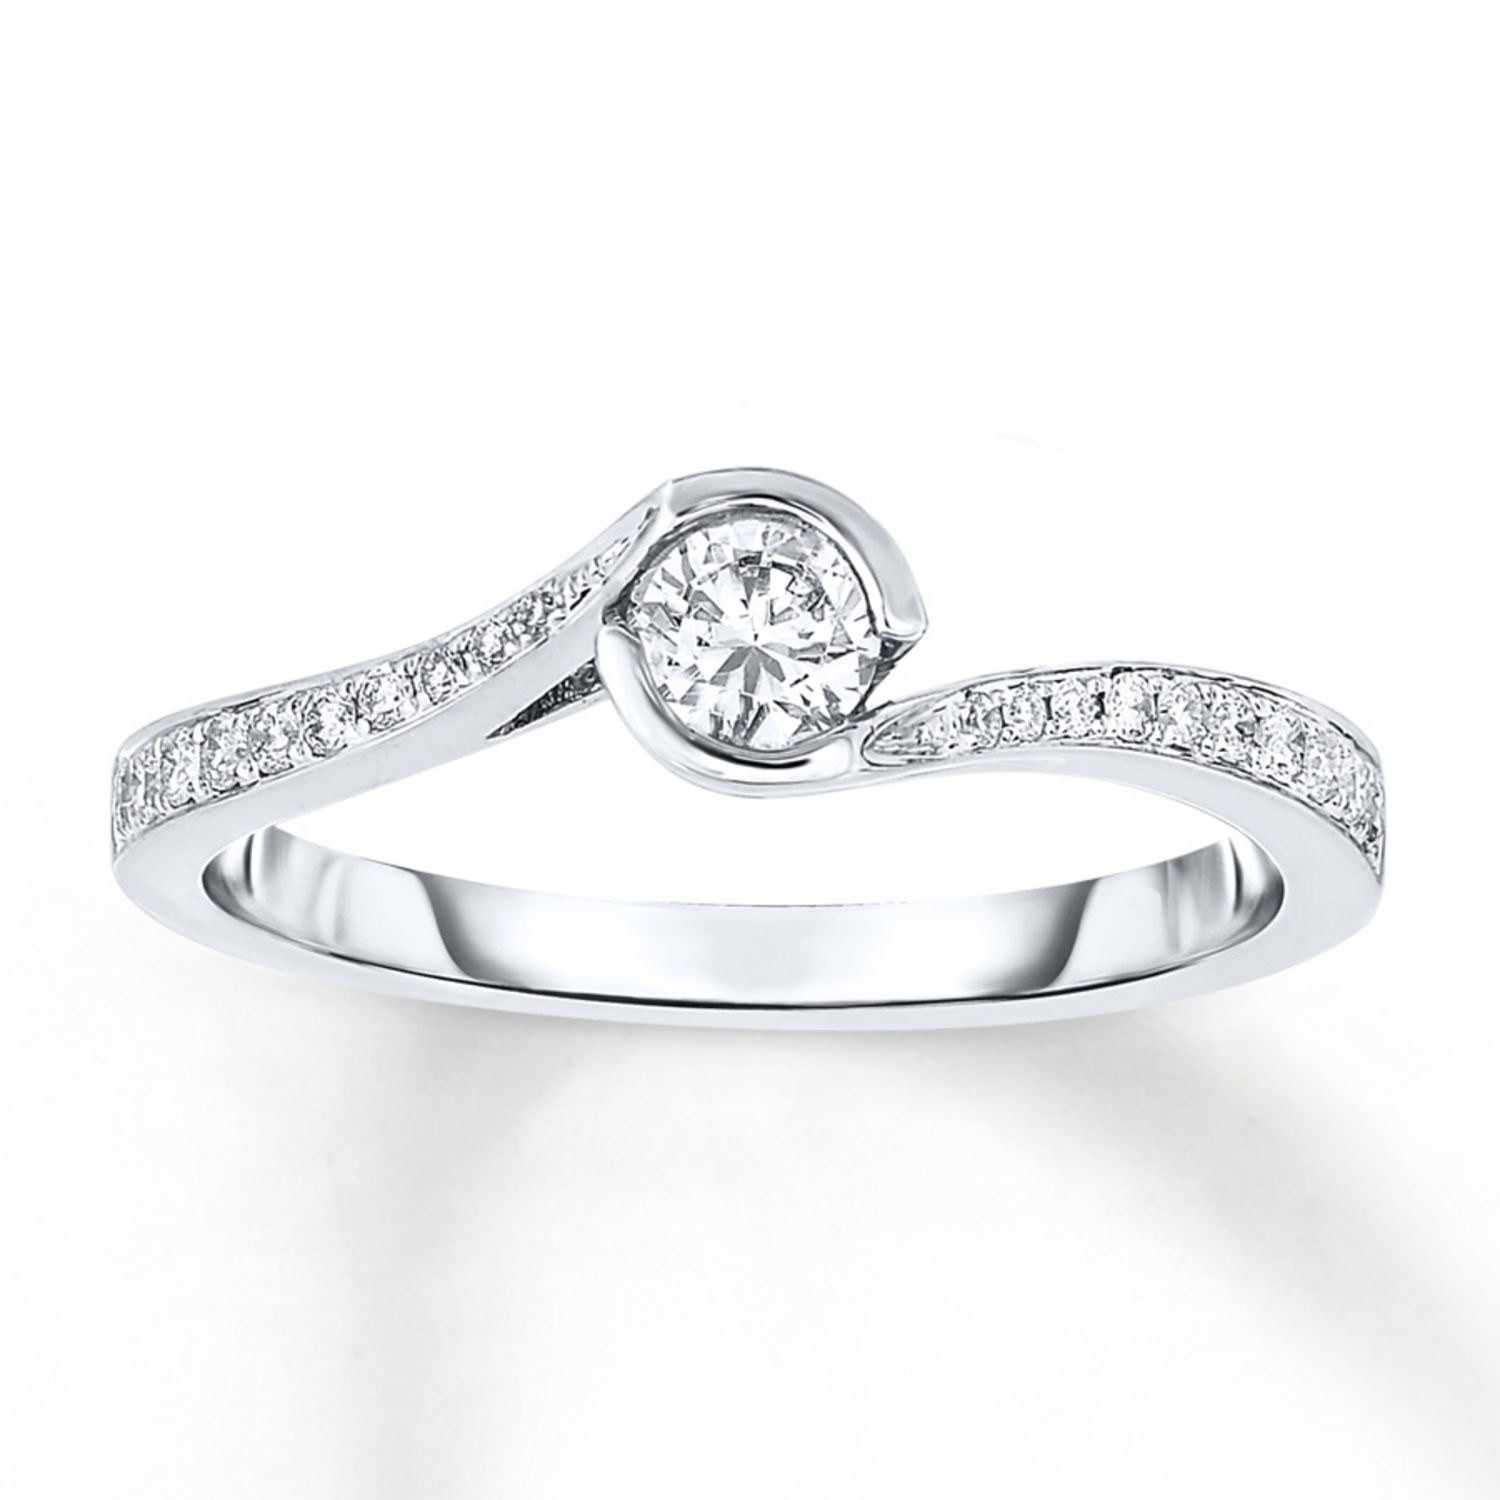 Affordable Diamond Rings
 Affordable Engagement Rings Under $1 000